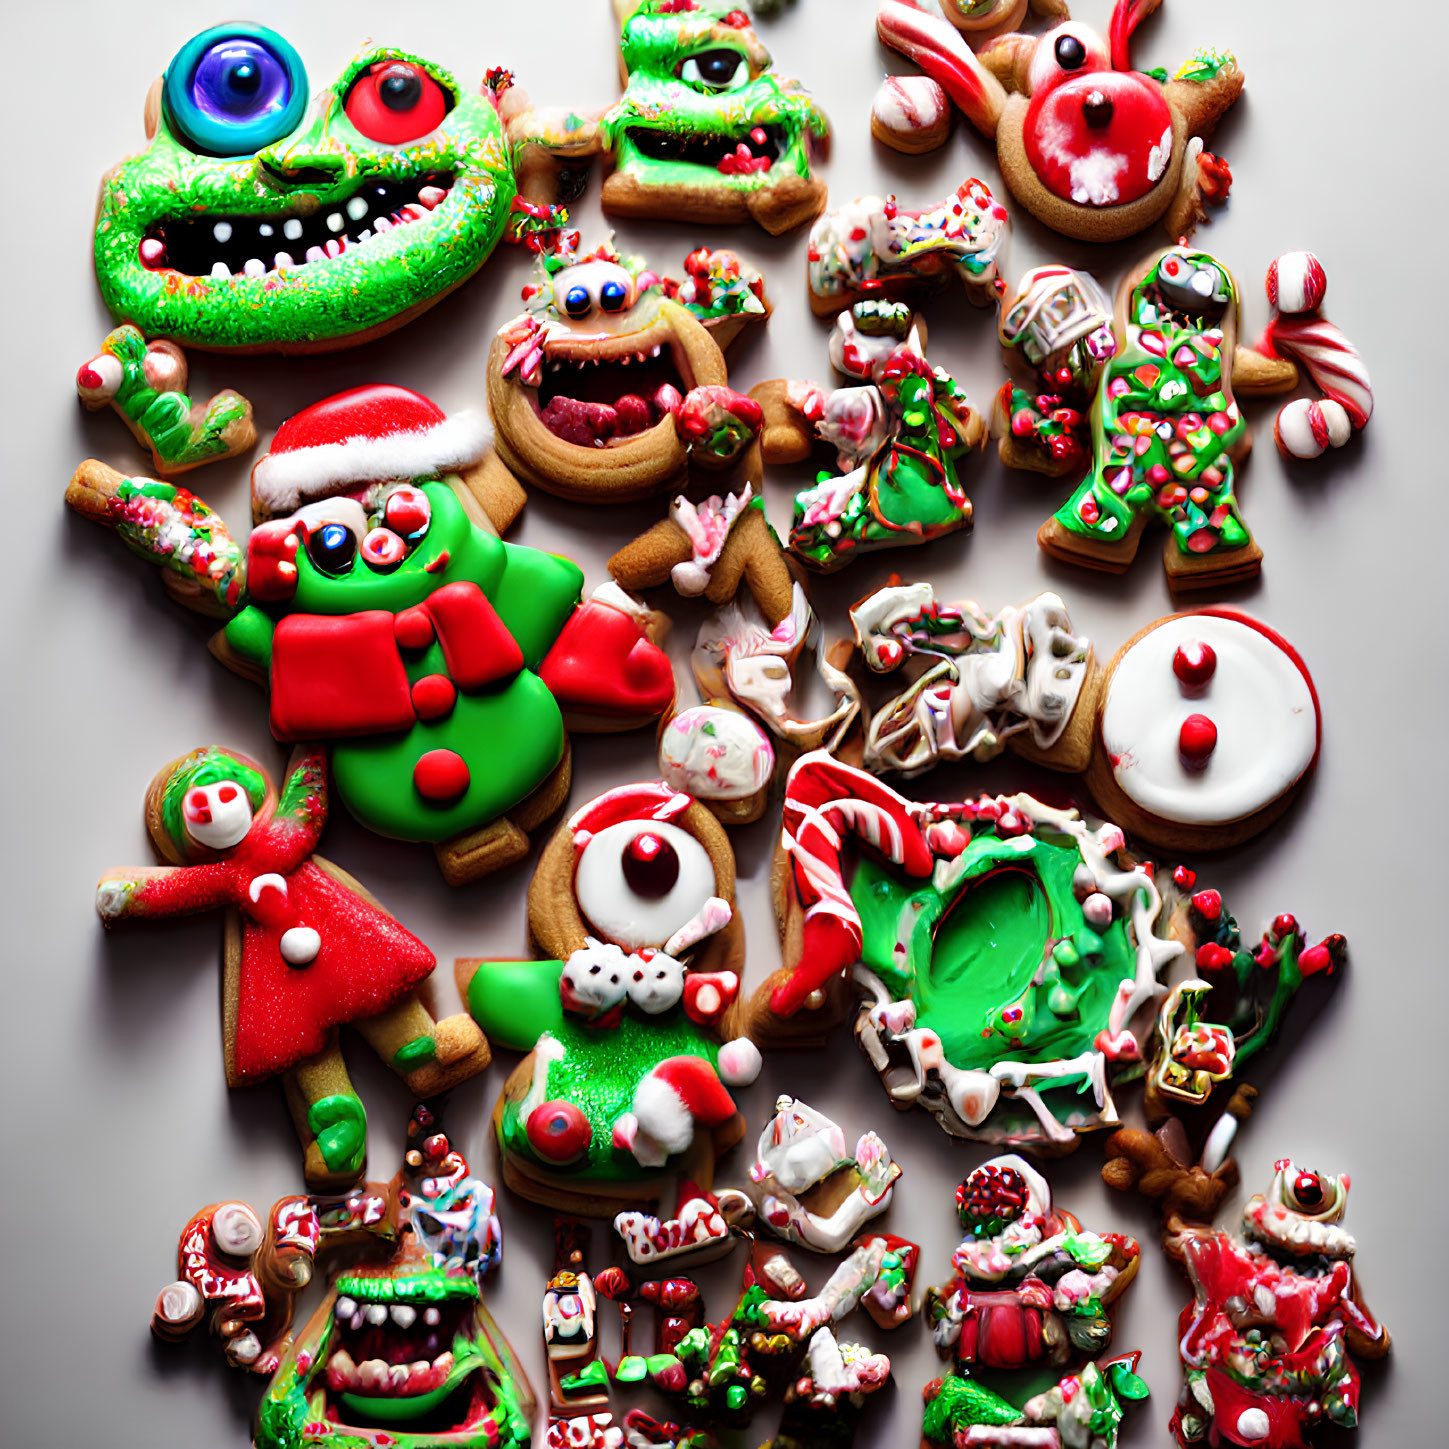 Colorful Monster-Themed Christmas Cookies with Icing Decoration